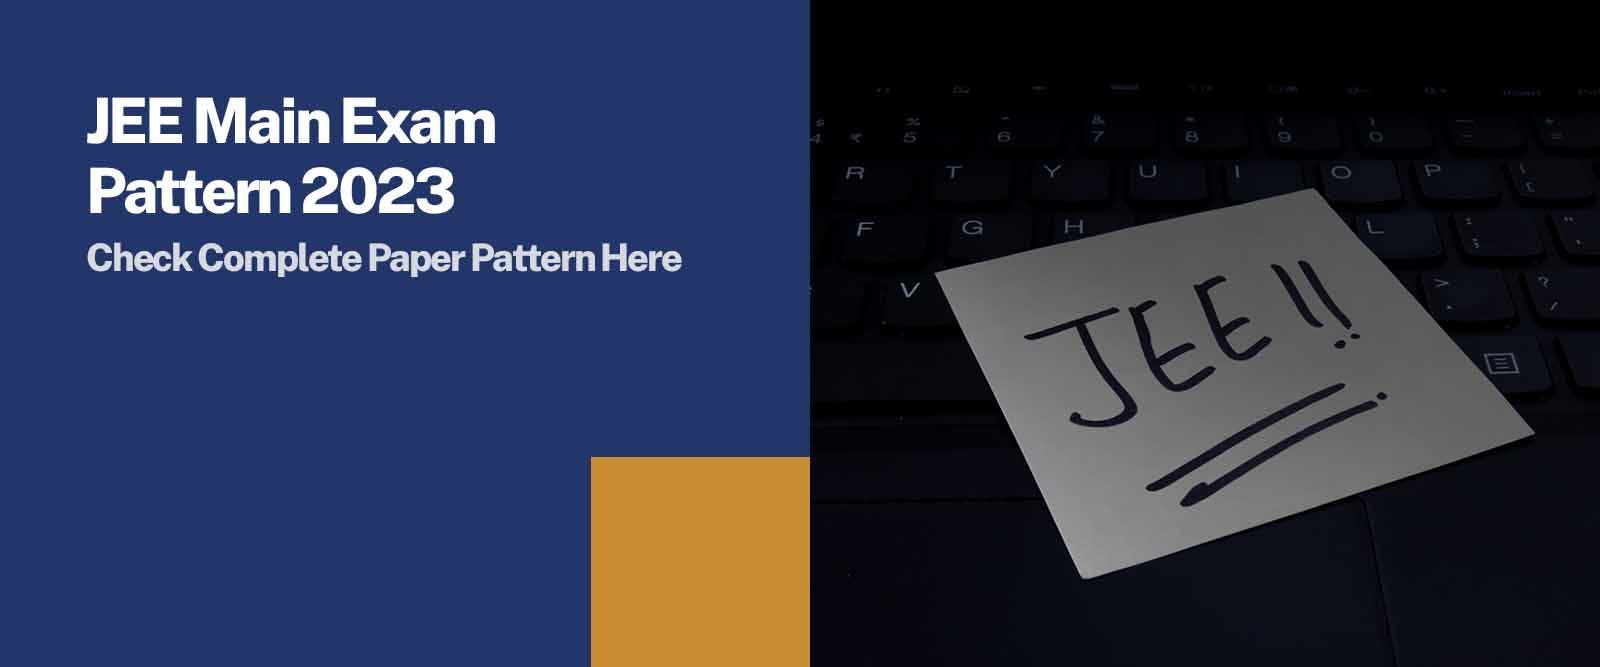 JEE Main Exam Pattern 2023 - Check Complete Paper Pattern Here